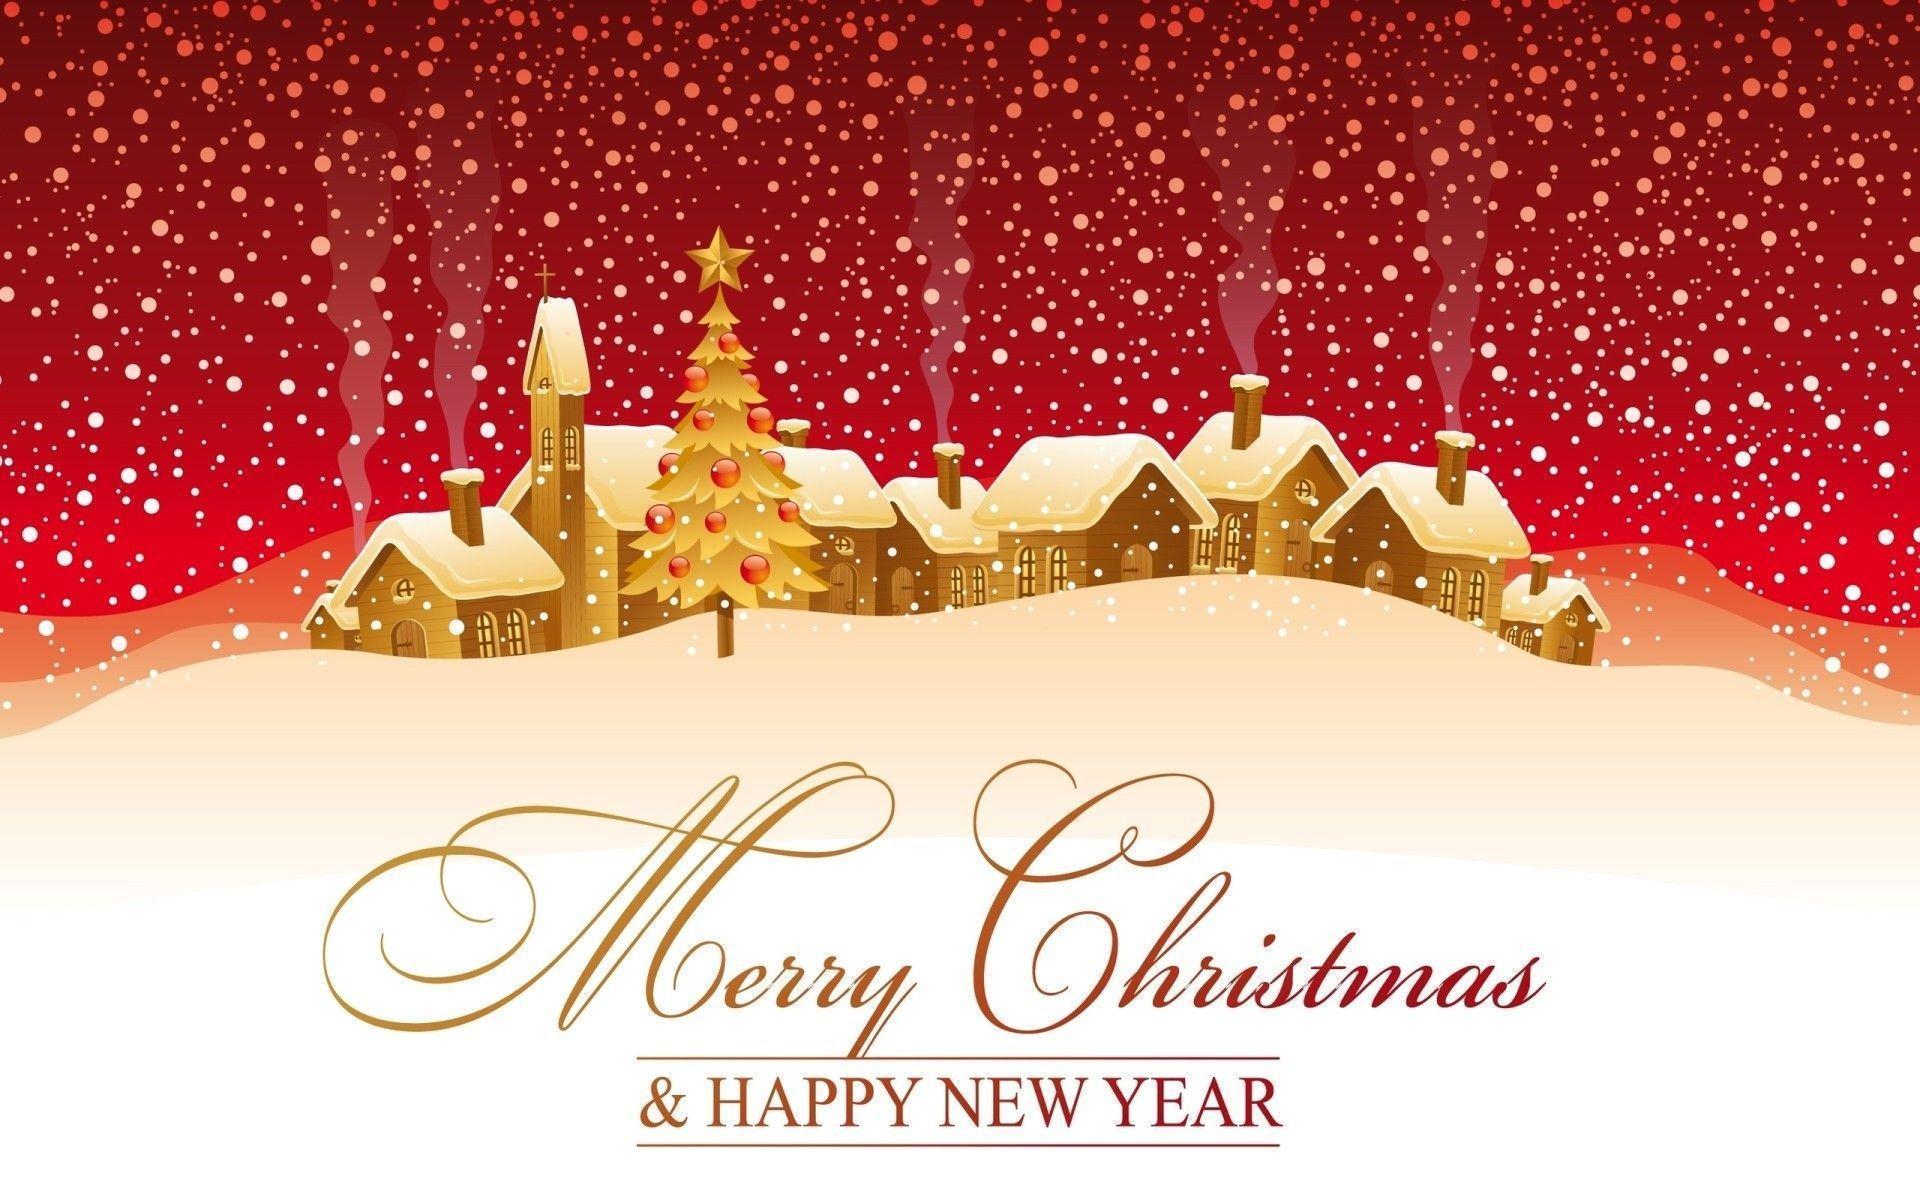 Merry Christmas and Happy new year Wallpaper. Download Free Word